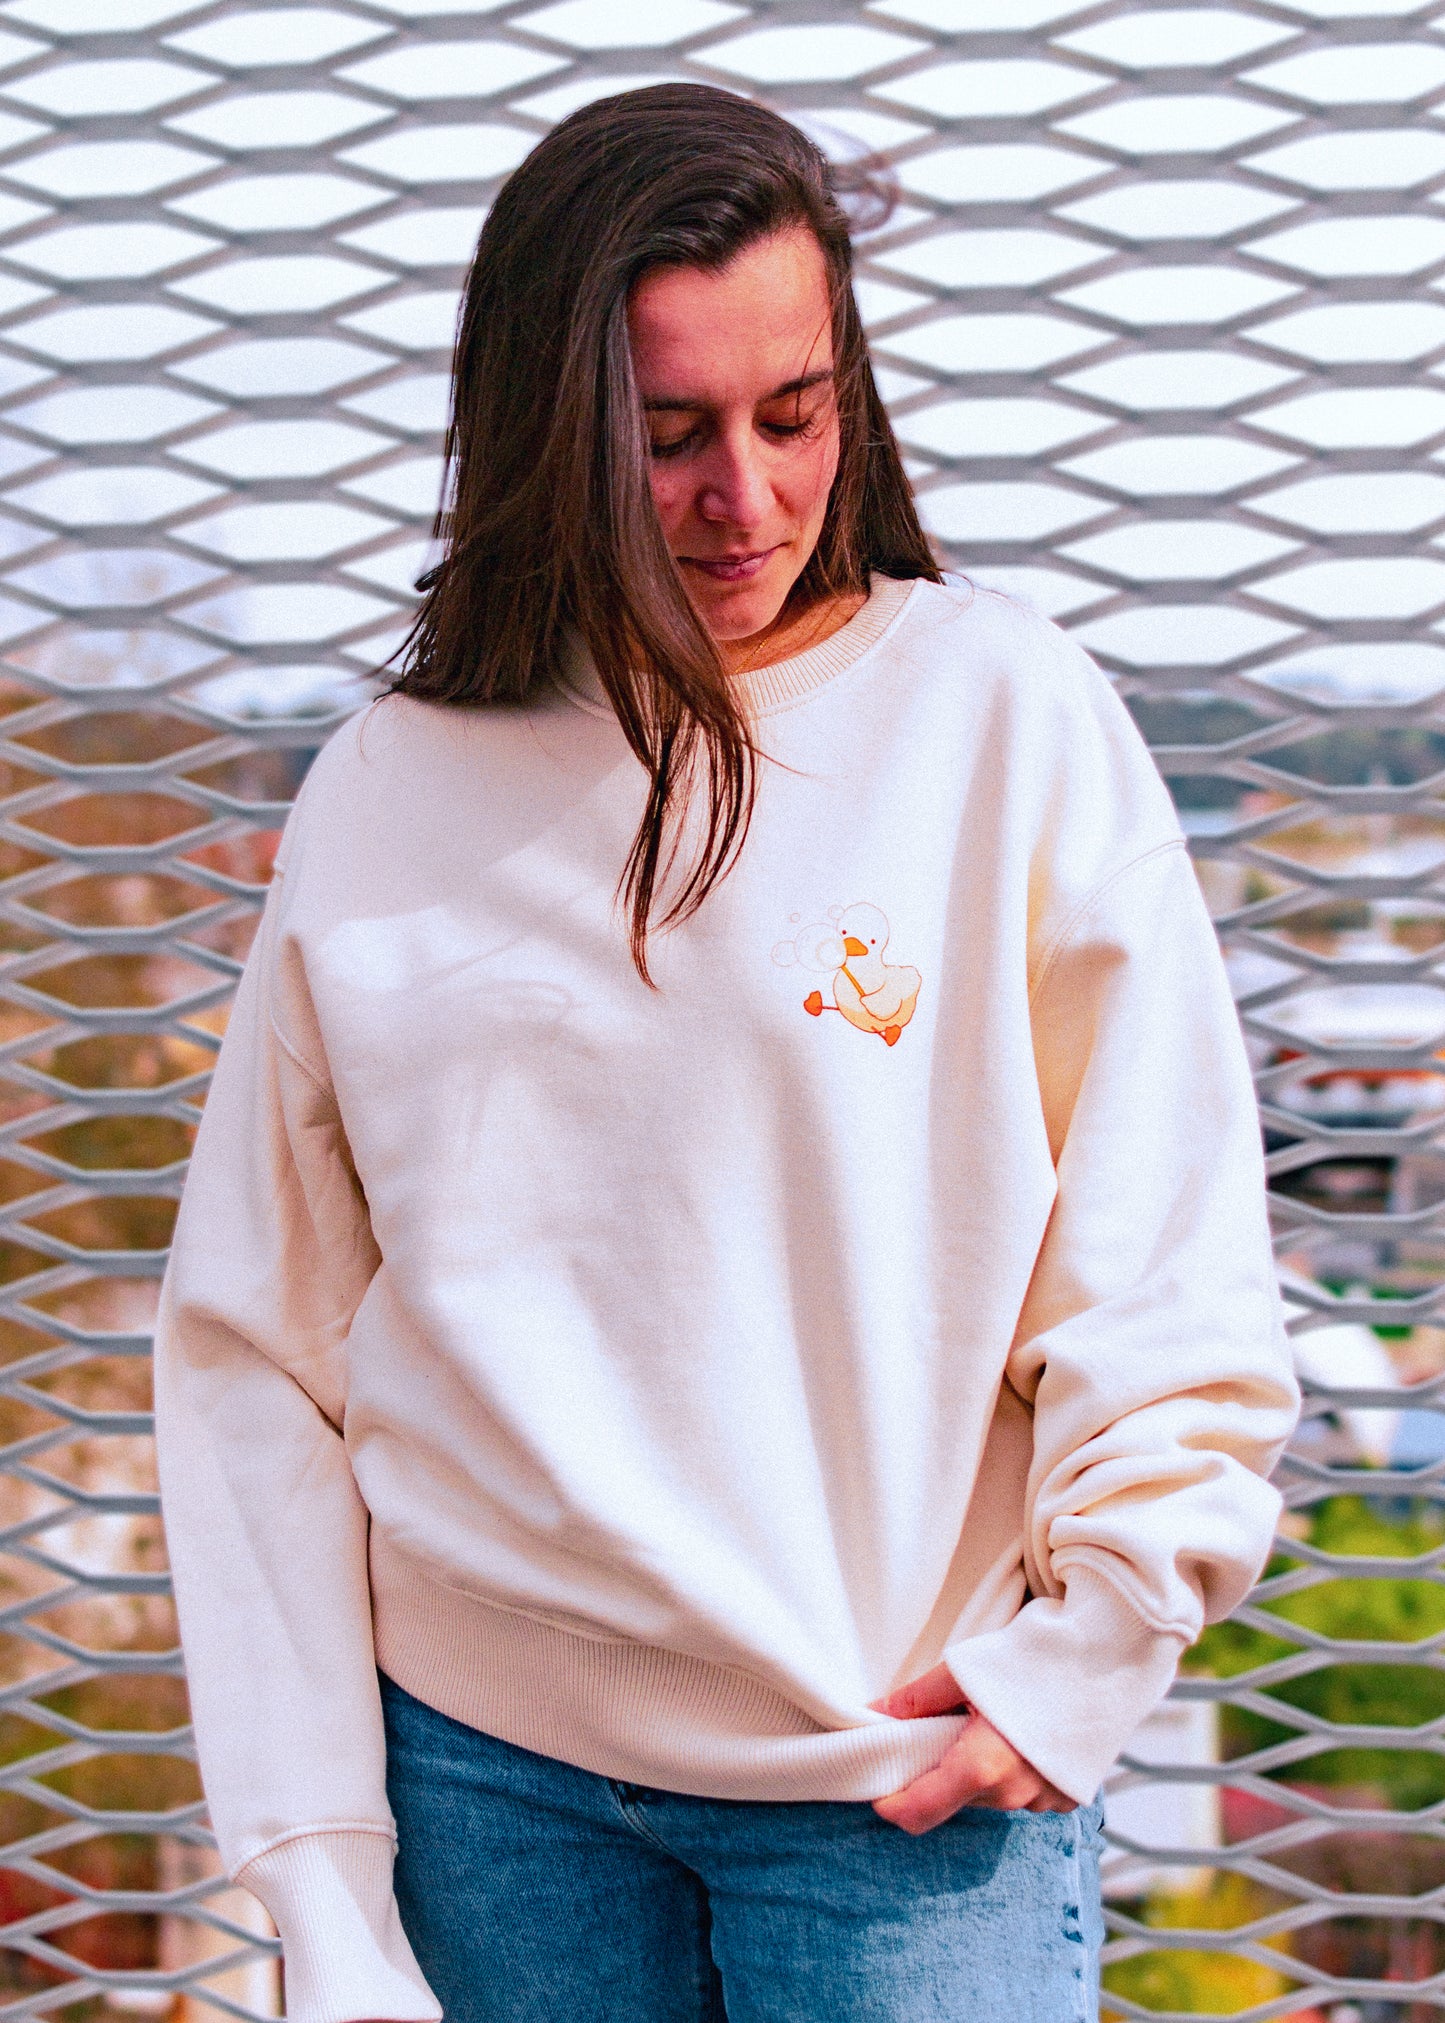 UNISEX sweatshirt - Duckling and the flowered boot